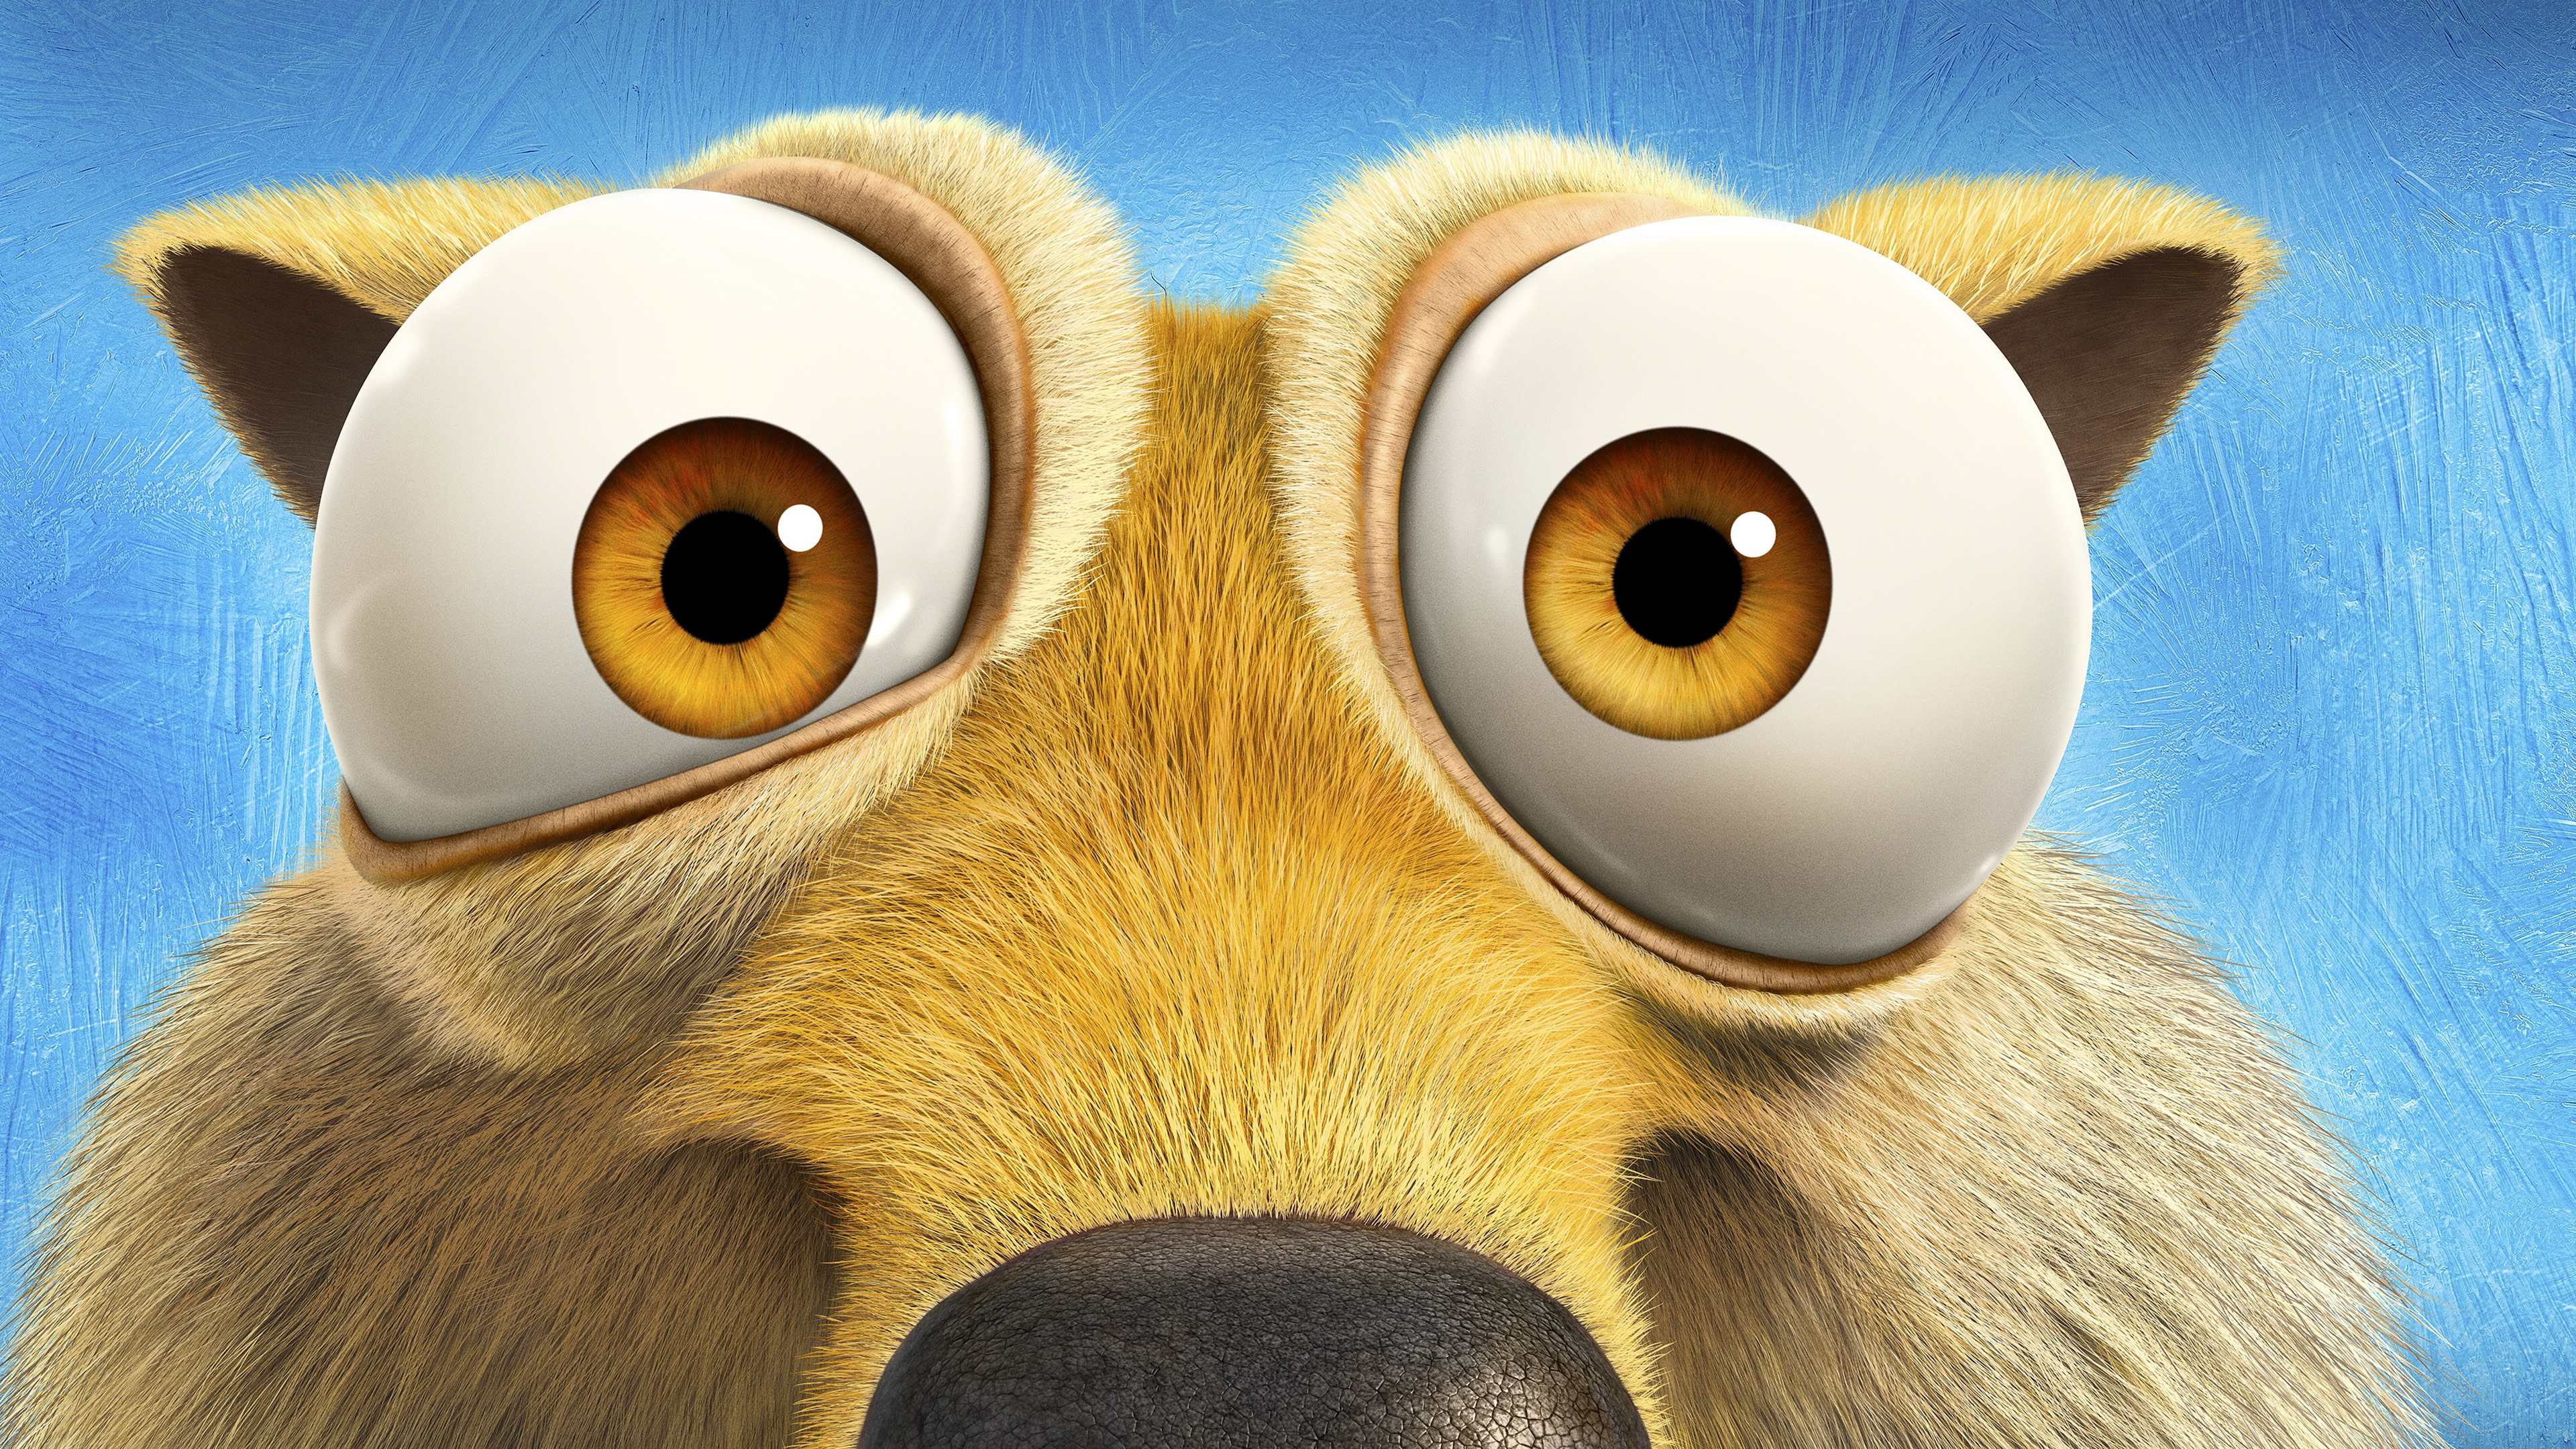 Scrat 4K wallpaper for your desktop or mobile screen free and easy to download